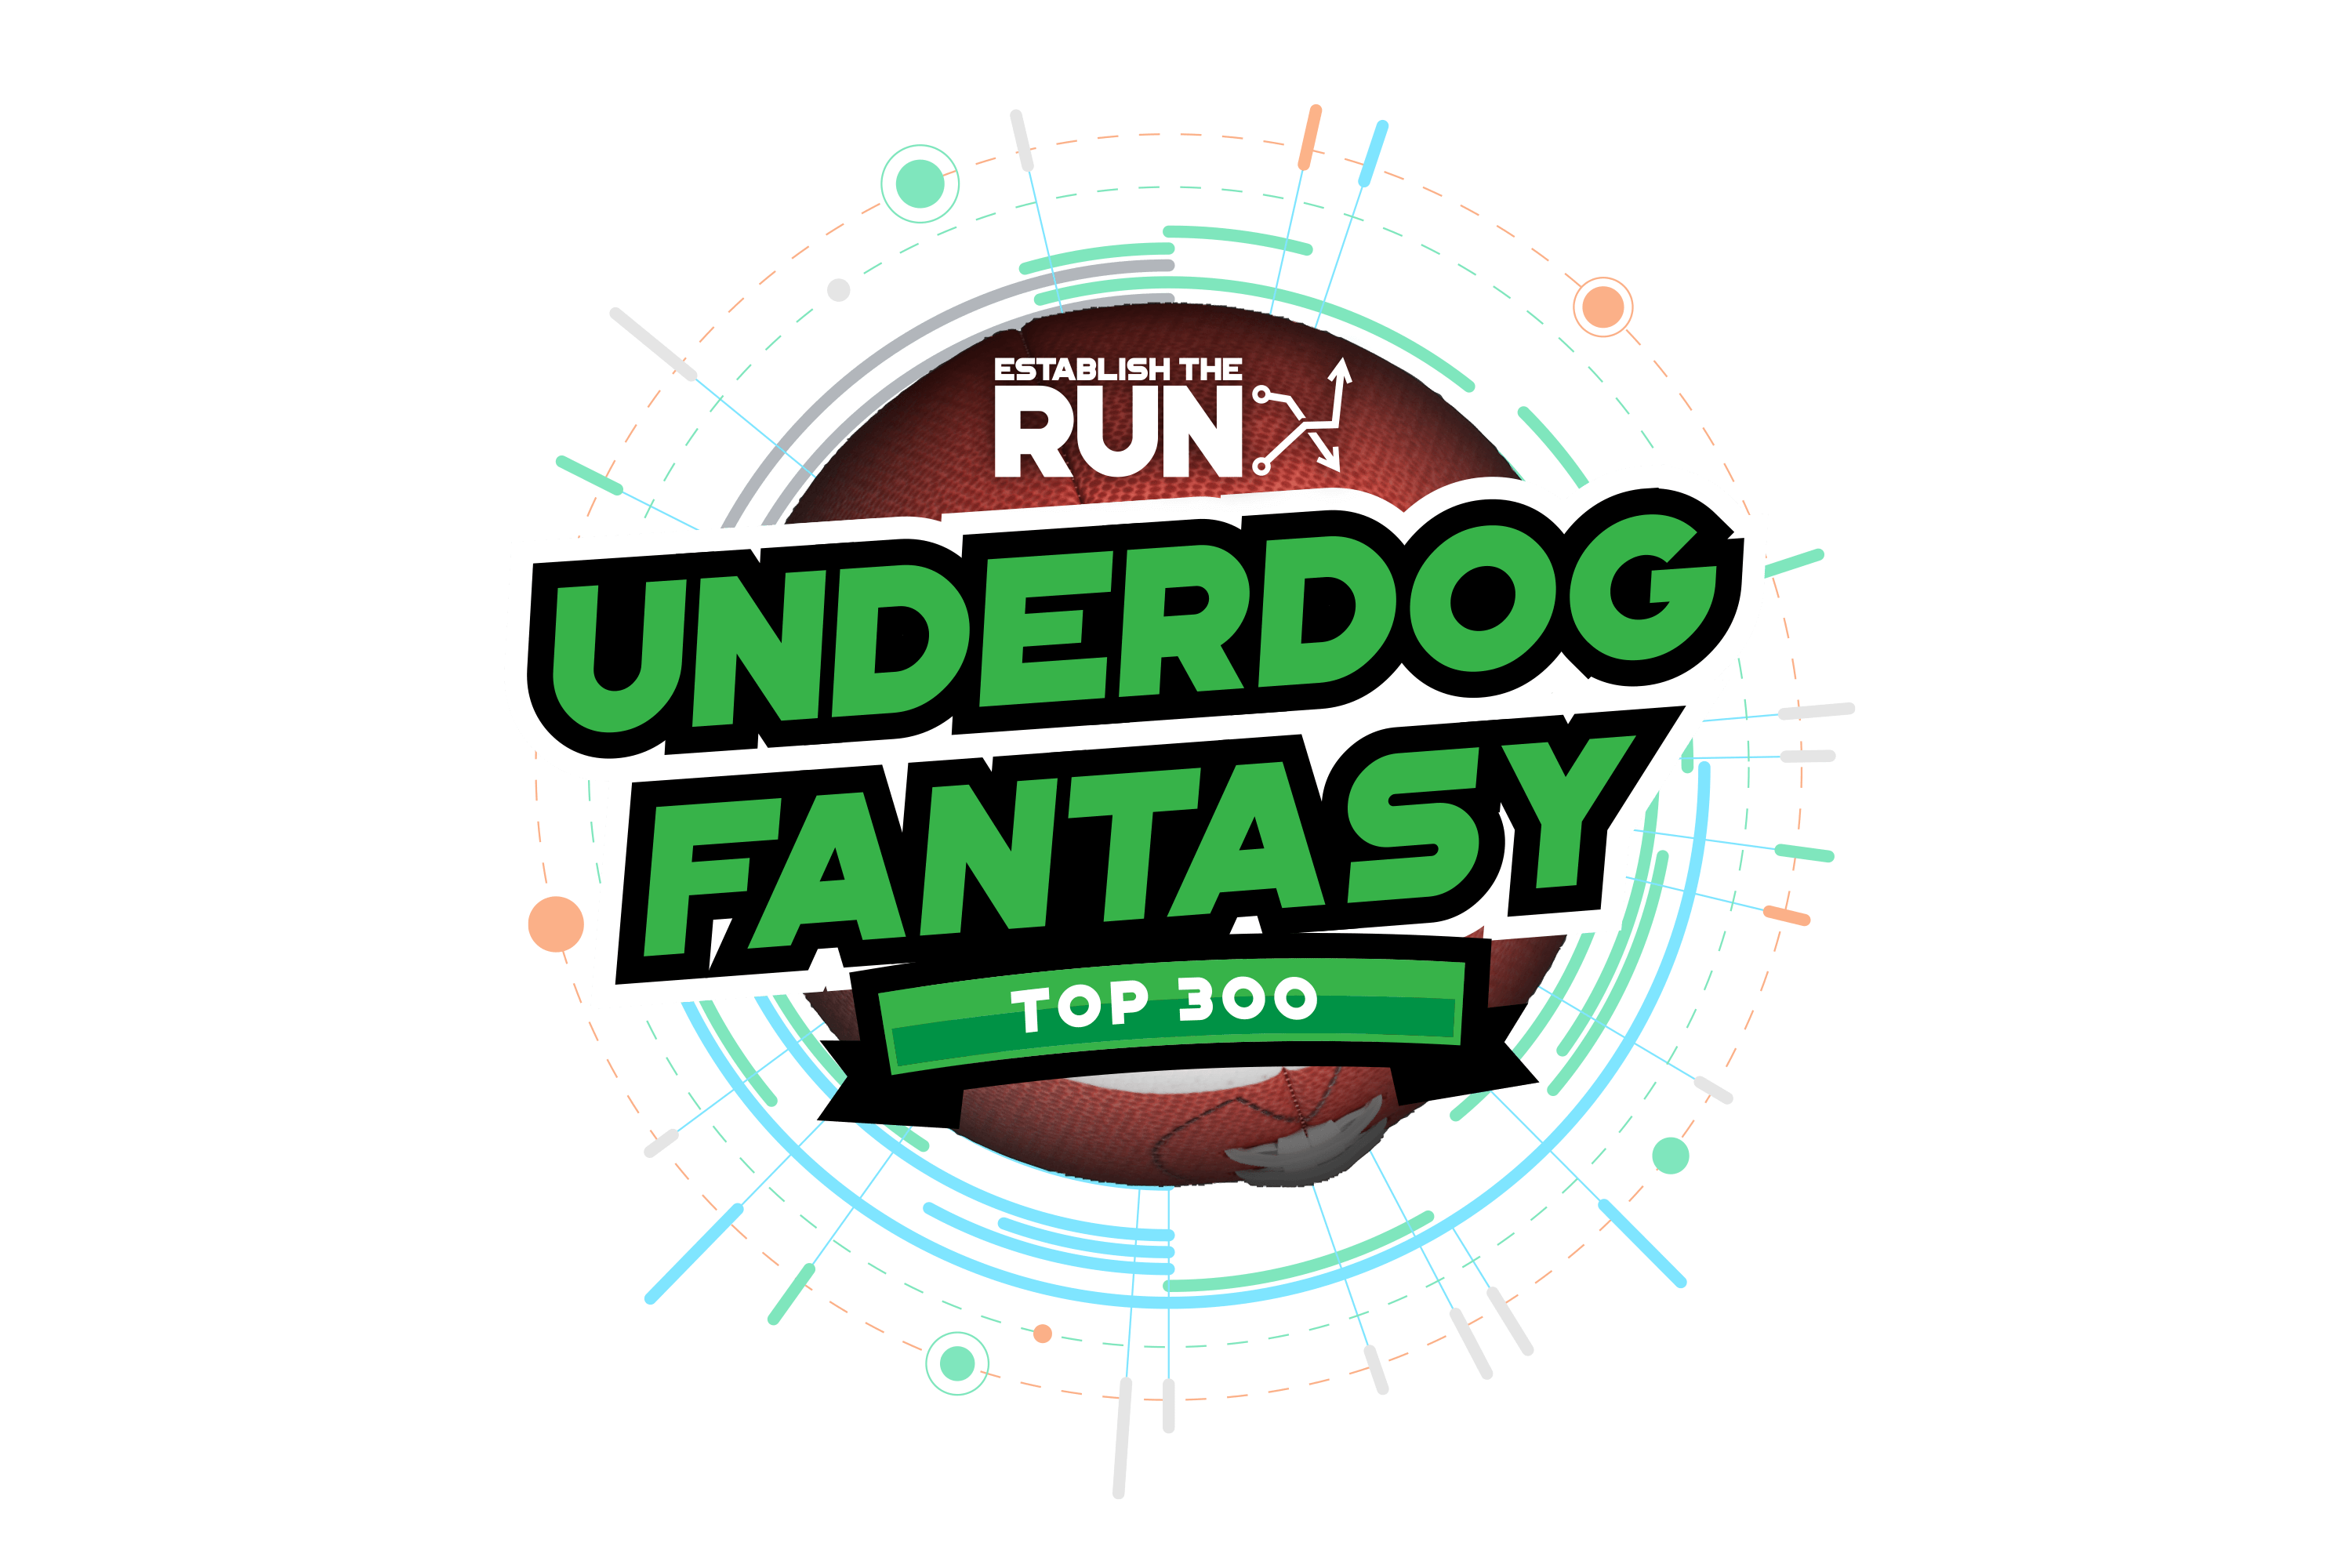 ETR’s Top 300 For Underdog Fantasy Best Ball Rankings (UPDATES 9AM DAILY)